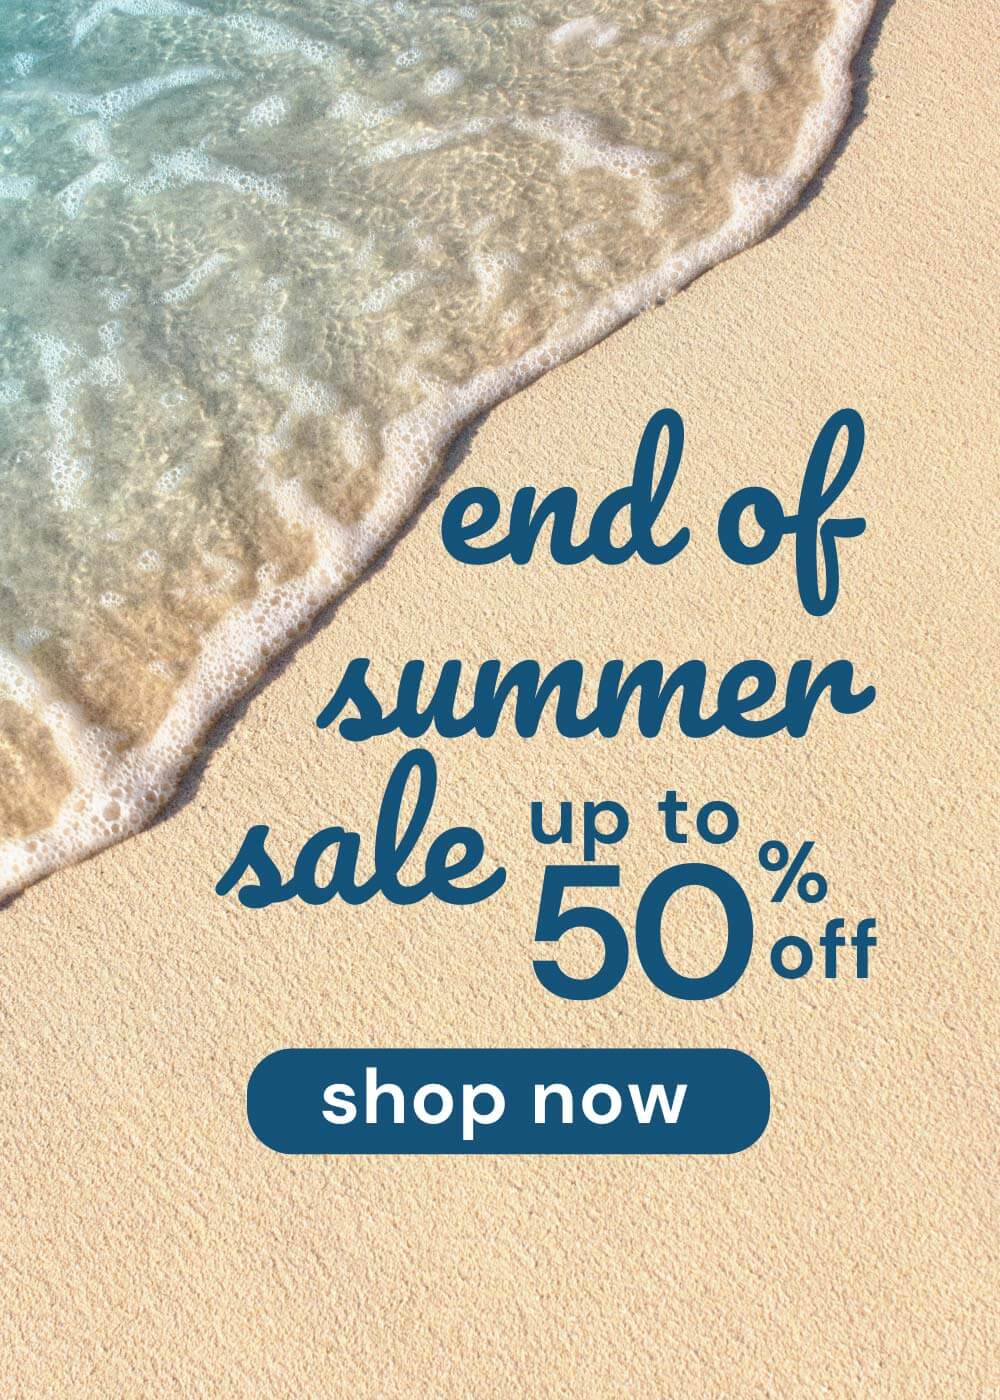 End of Summer Sale up to 50% Off Shop Now